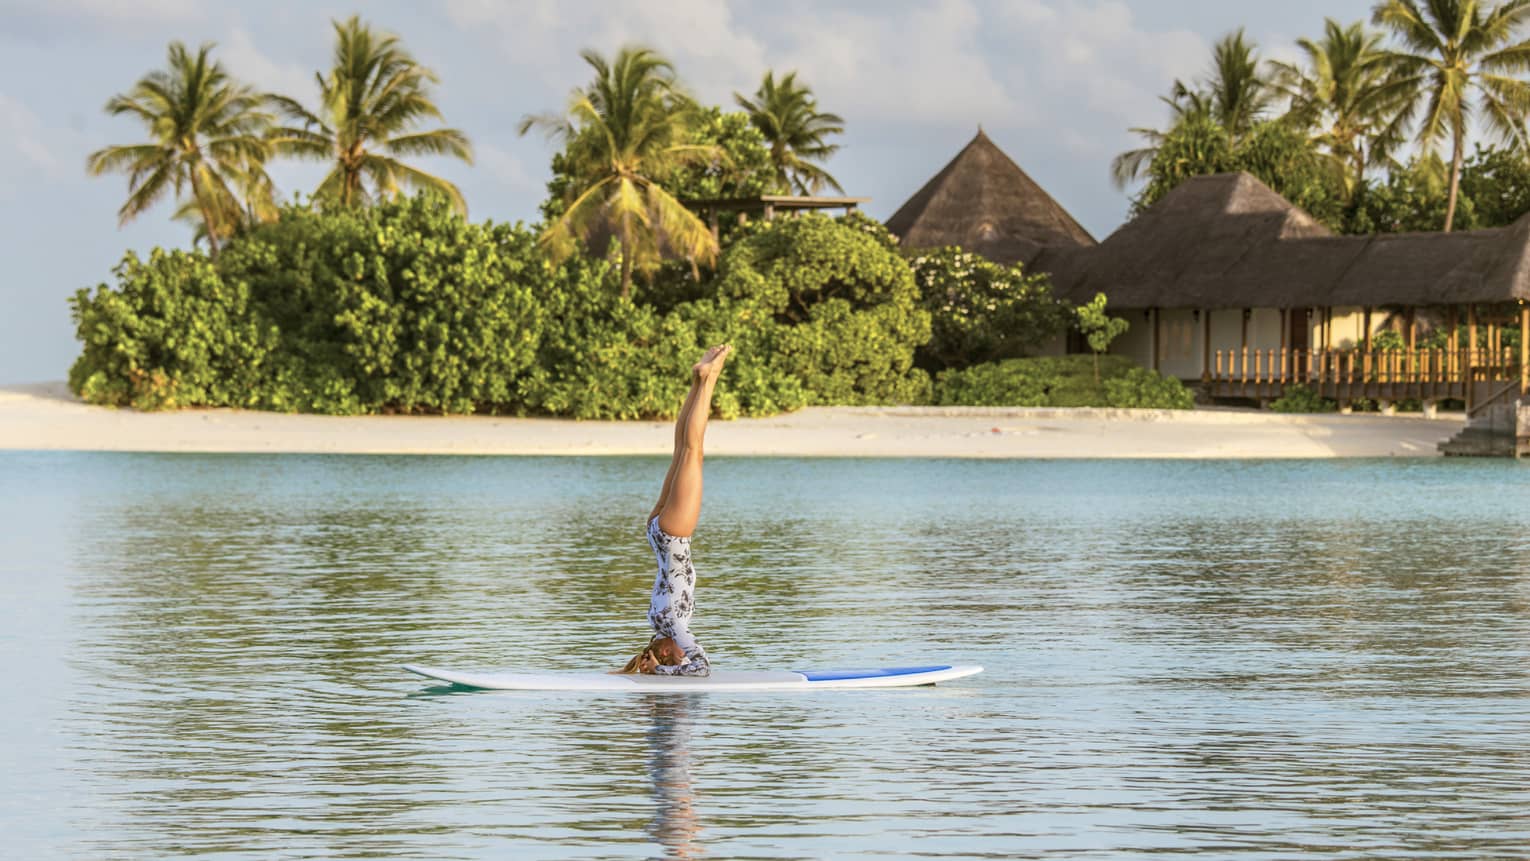 Woman balances on arms during stand-up paddleboard yoga session on Indian Ocean